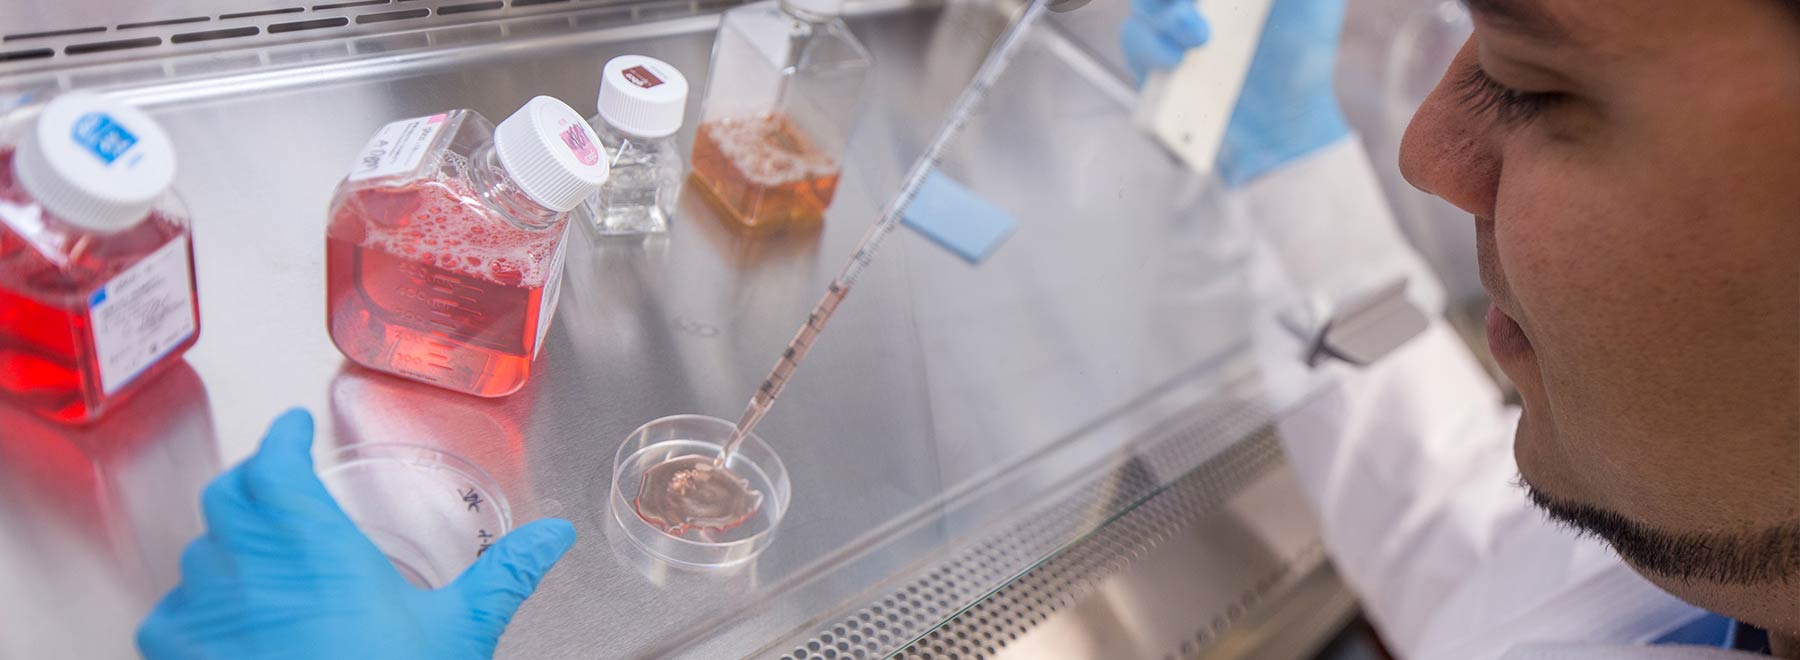 A researcher uses a pipet to conduct an experiment at a lab bench